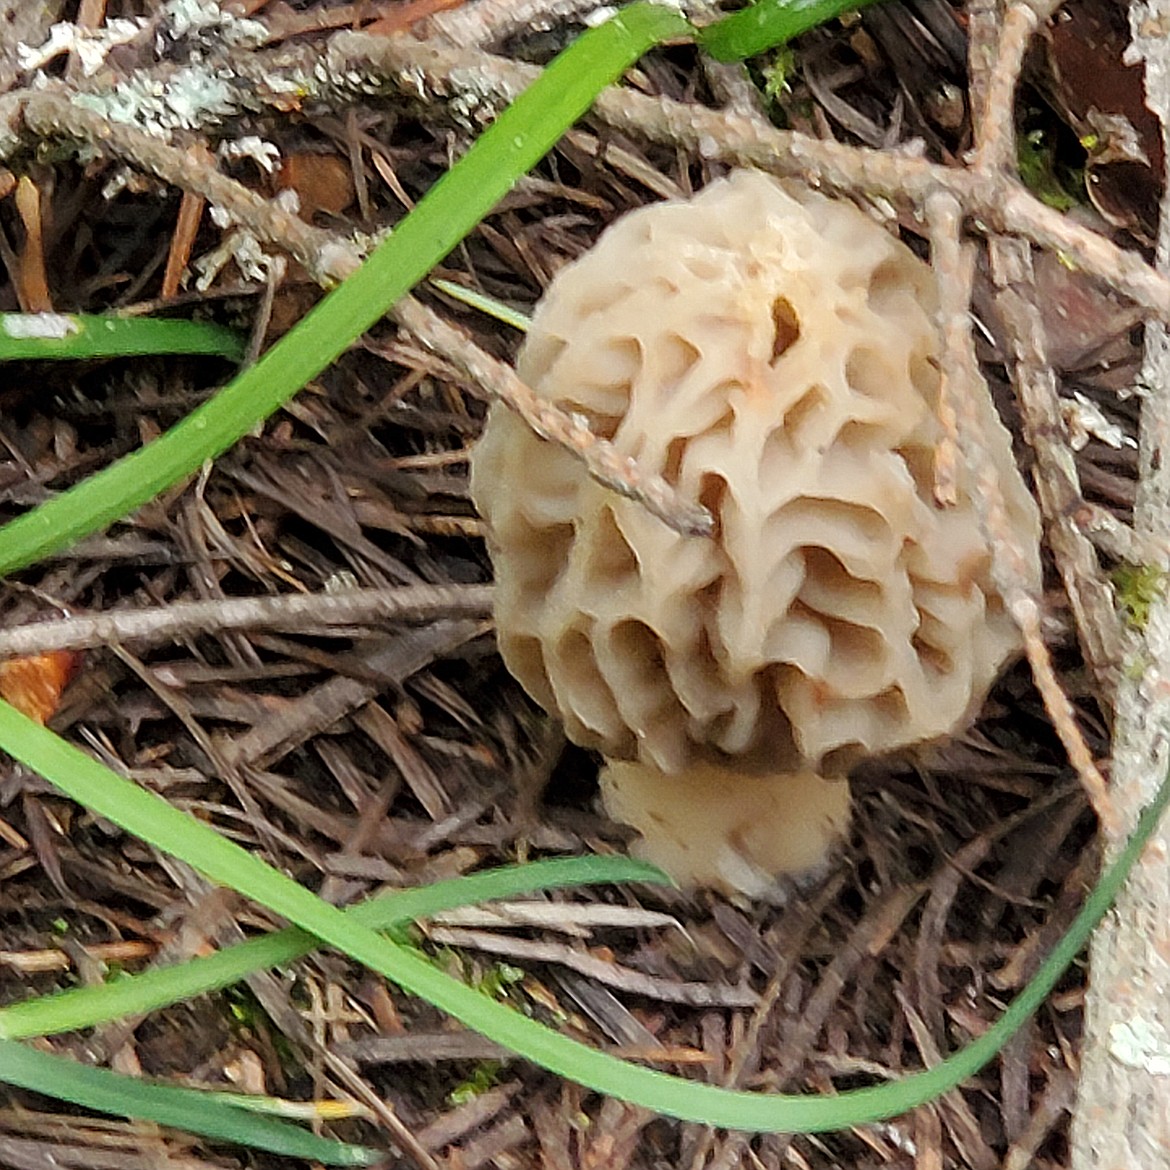 Where to look? Morels are found where you find them. They usually pop up on the ground in moist forest areas, open woodland, along brushy stream ways, in wooded draws, or fence lines. But they also appear around dead trees or burns.